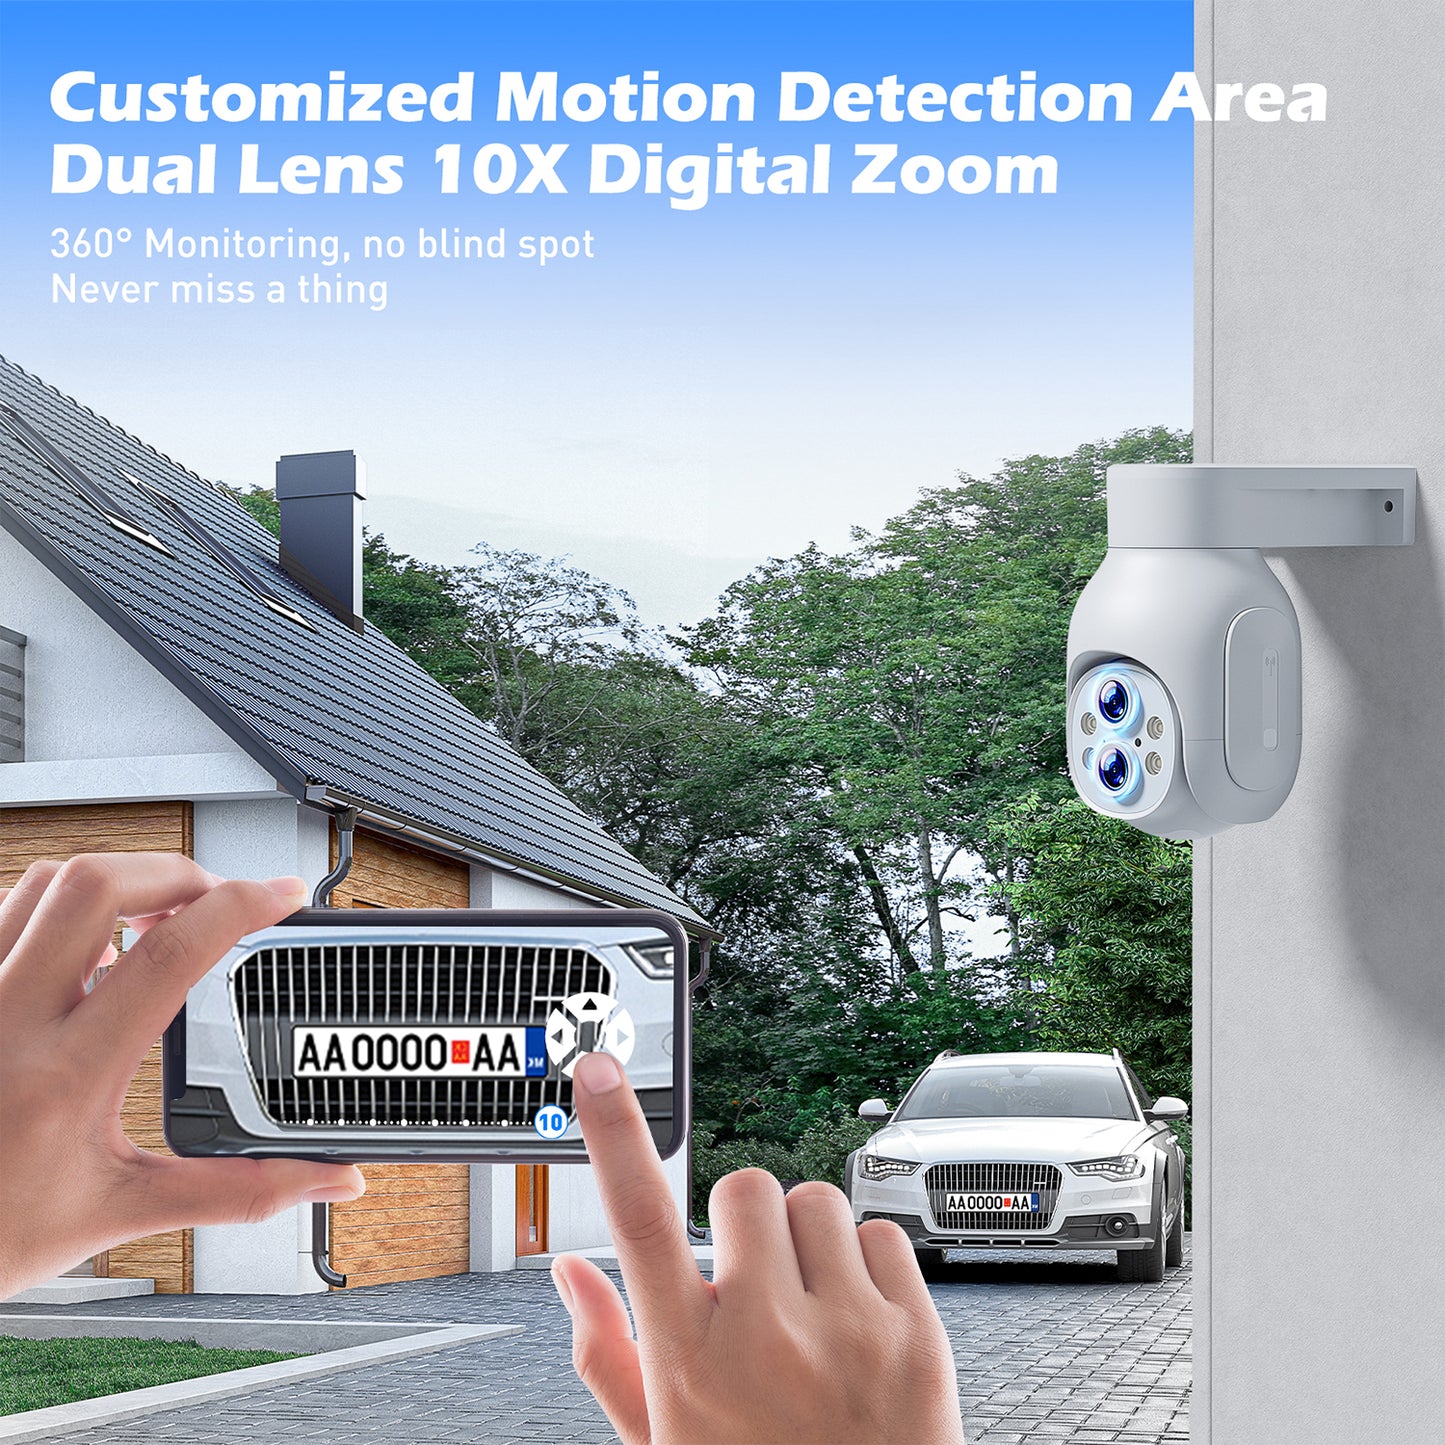 TOGUARD SC22 2K/3MP WiFi Outdoor Security Camera with 10X Hybrid Zoom Wireless Dome Surveillance